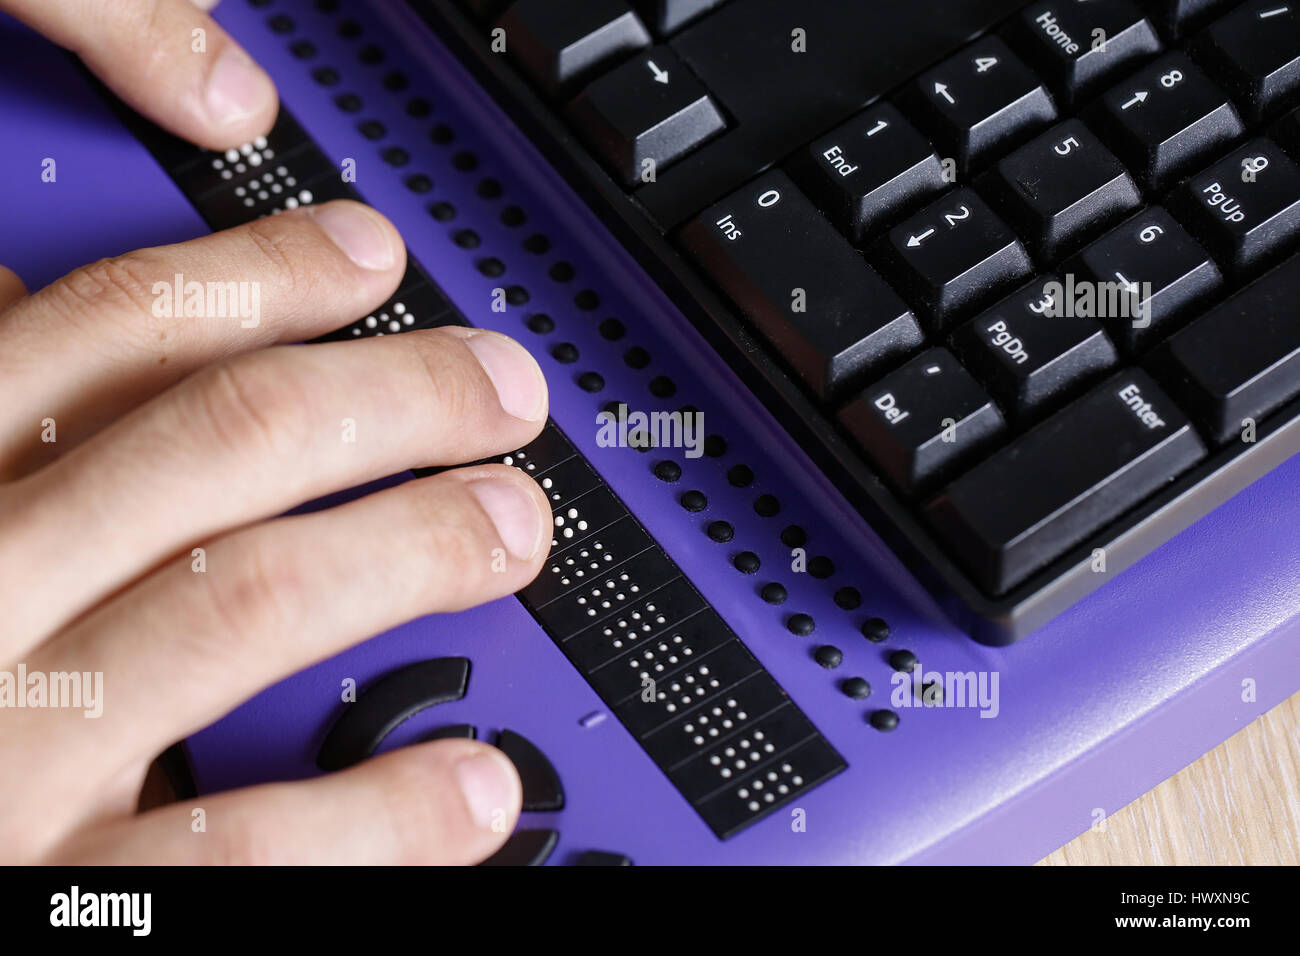 Blind person using computer with braille computer display and a computer keyboard. Blindness aid, visual impairment, independent life concept. Stock Photo